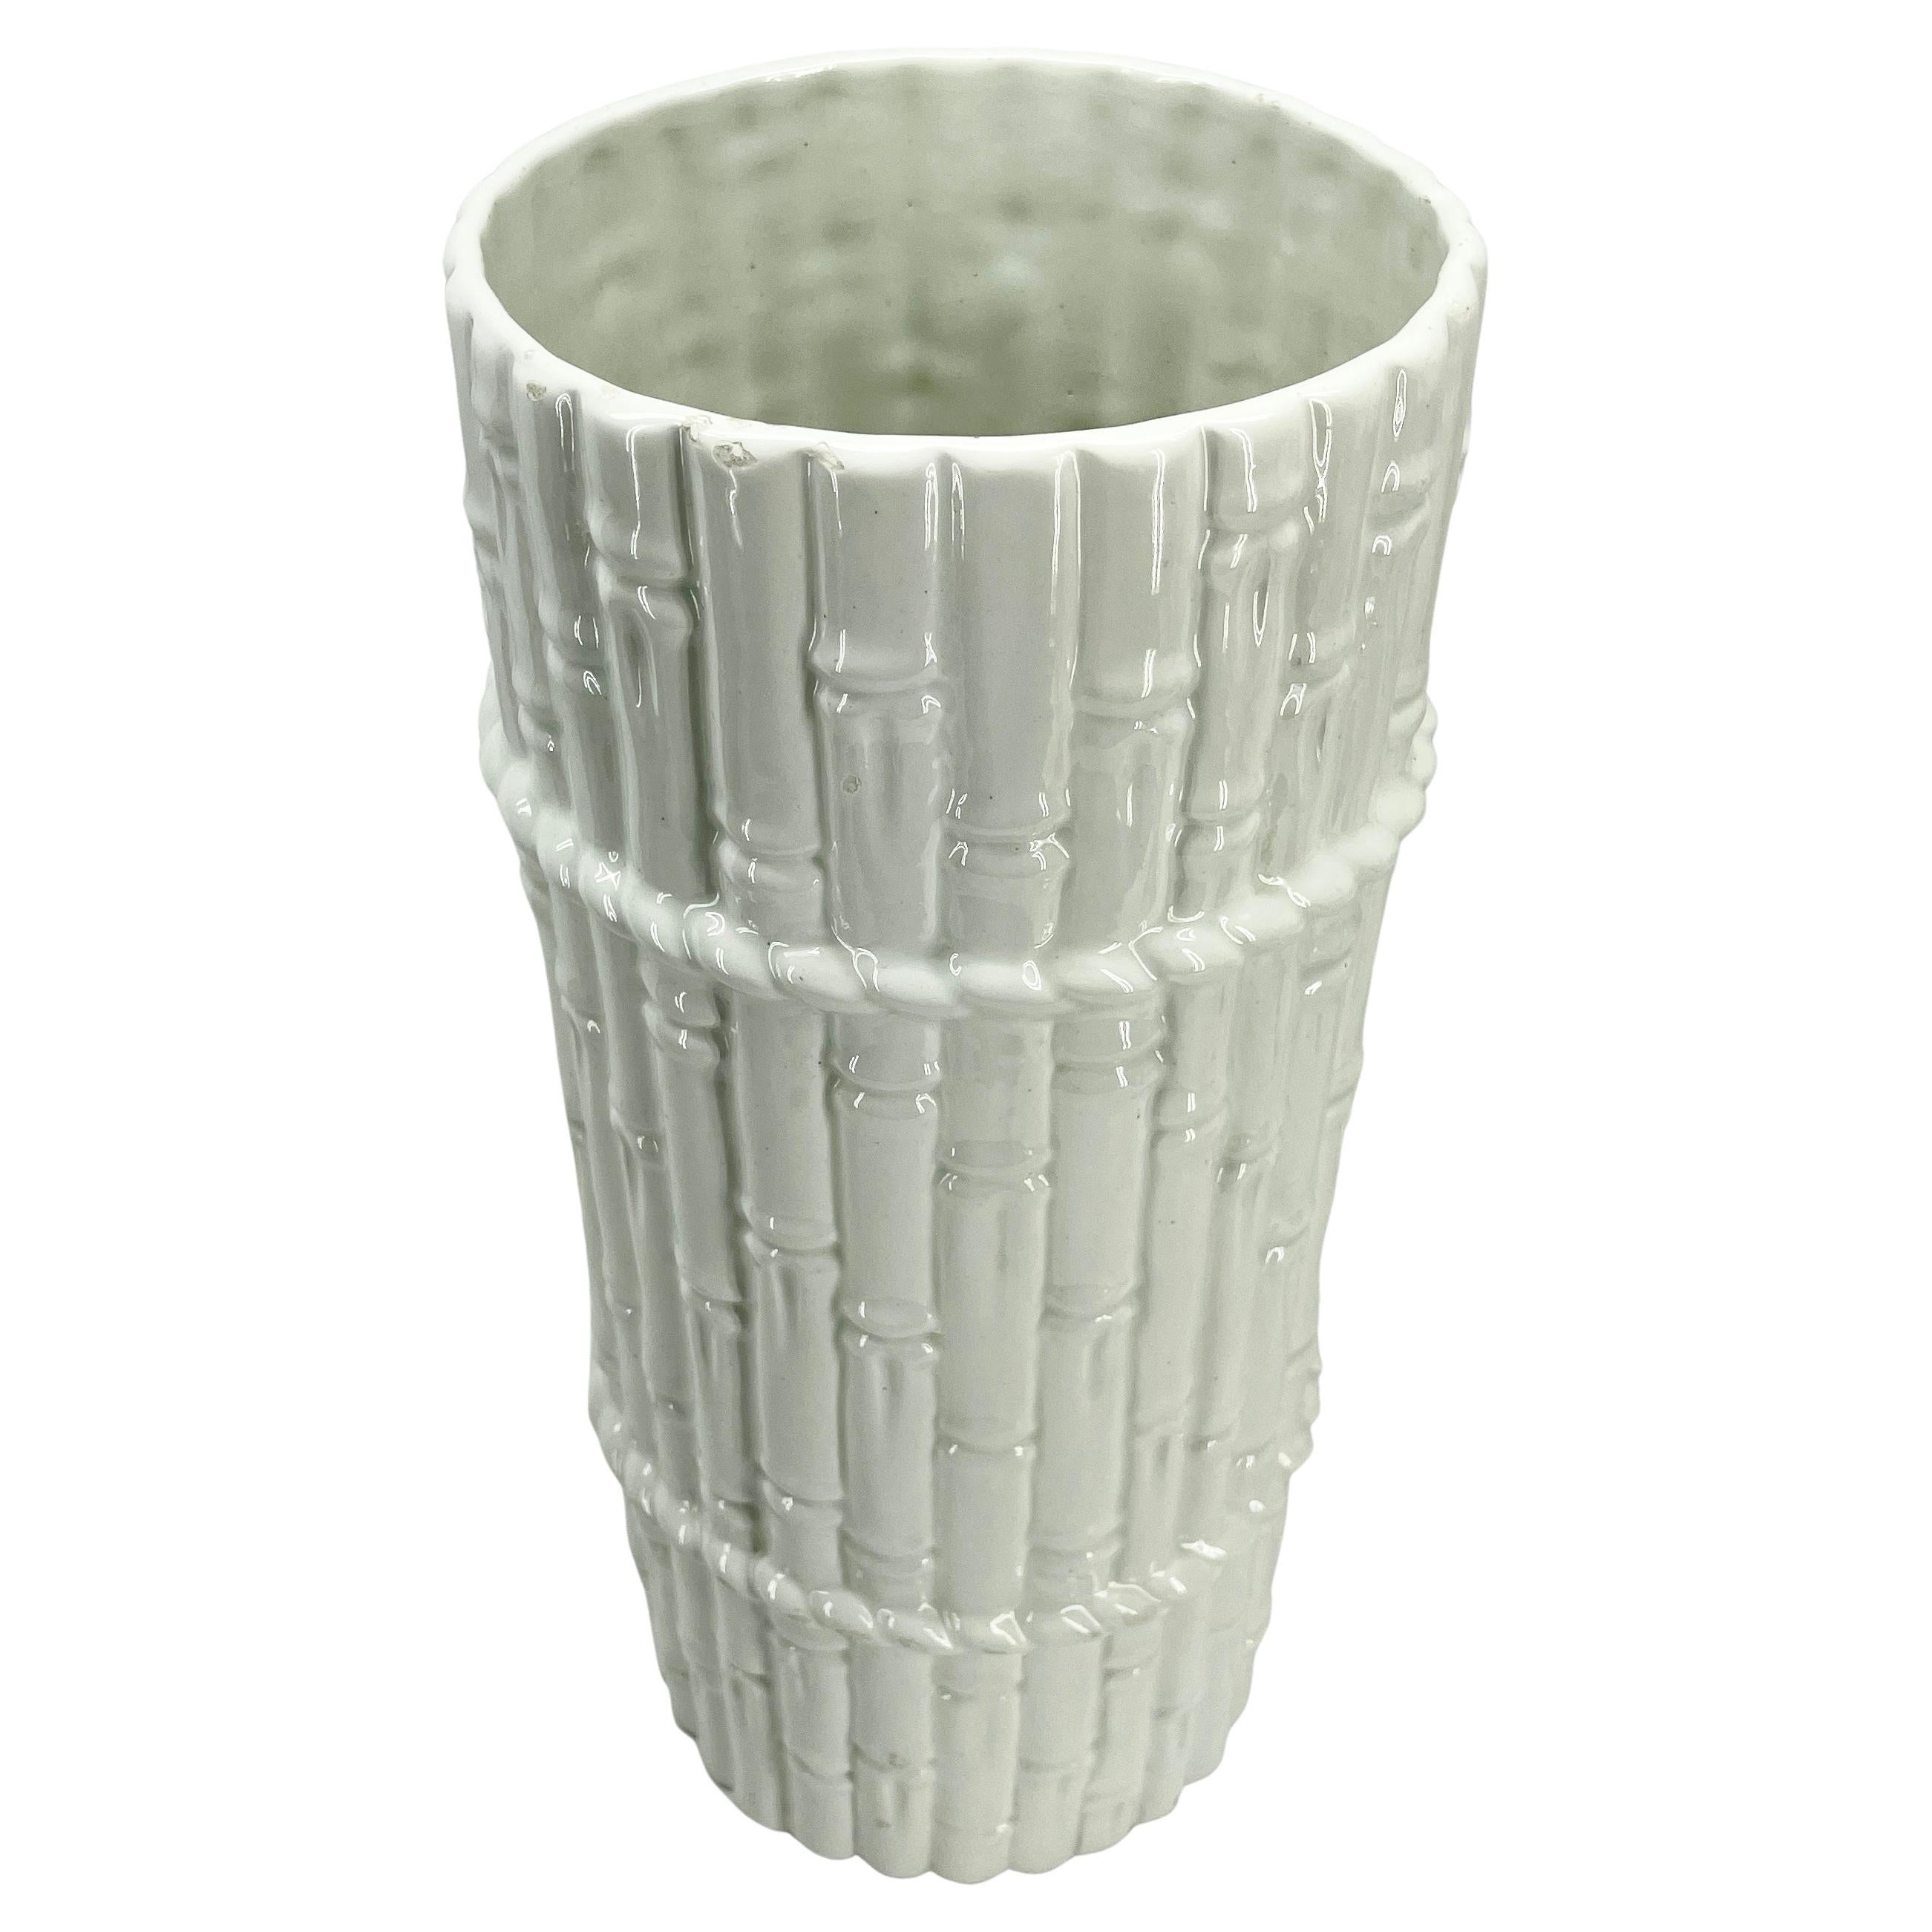 Vintage Isco faux bamboo umbrella stand, made in Spain. 
White and classic, this faux bamboo ceramic umbrella stand is an iconic Mid-Century Modern design. The umbrella stand is a classic example of modern homes in the late 1960's and 1970's.